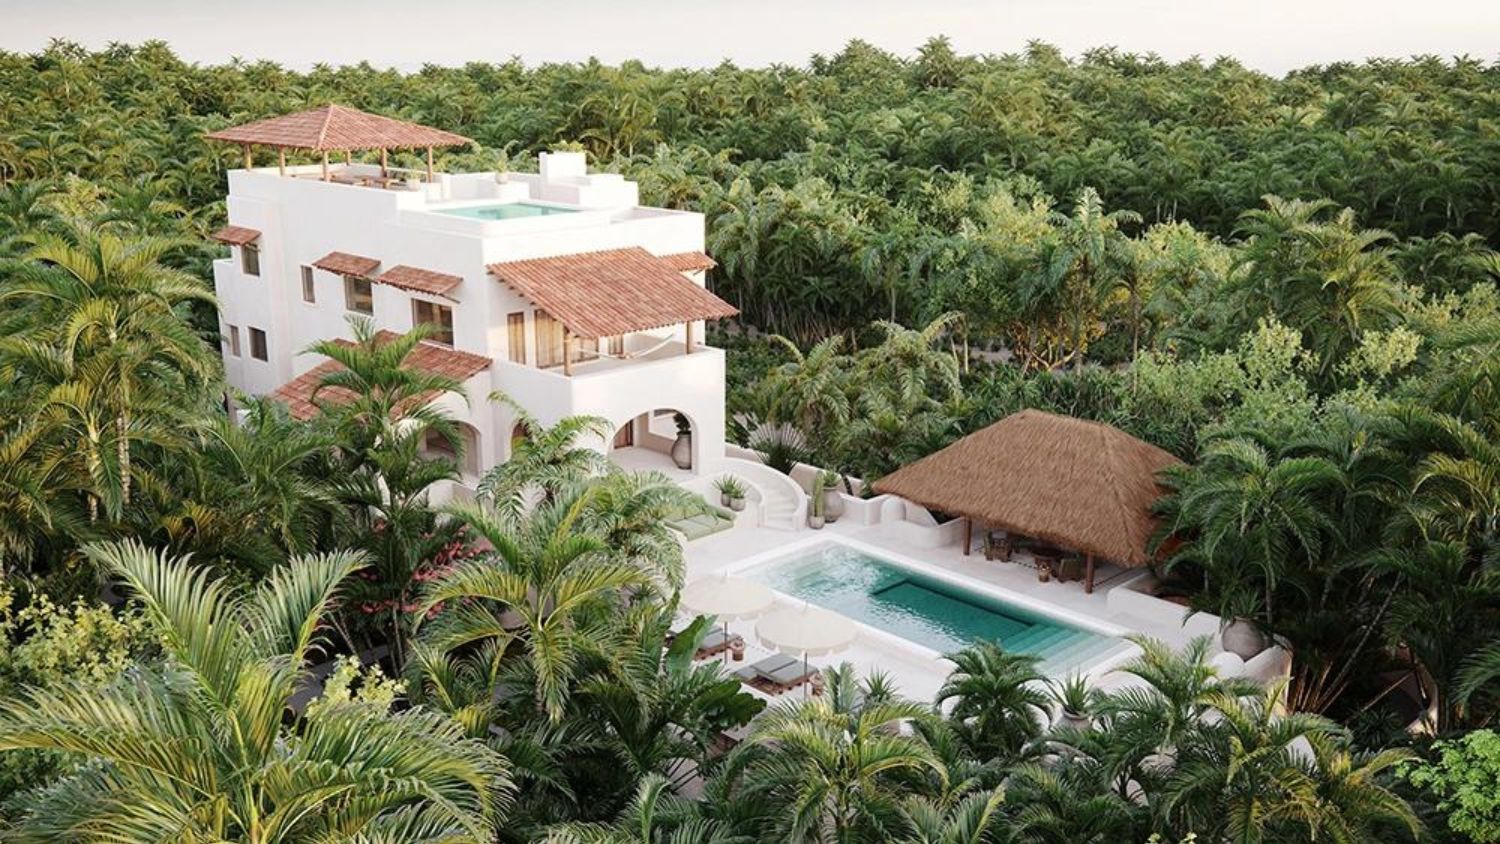 Places to Stay: Hotel Esencia, A Secluded Gem on Mexico’s Riviera Maya